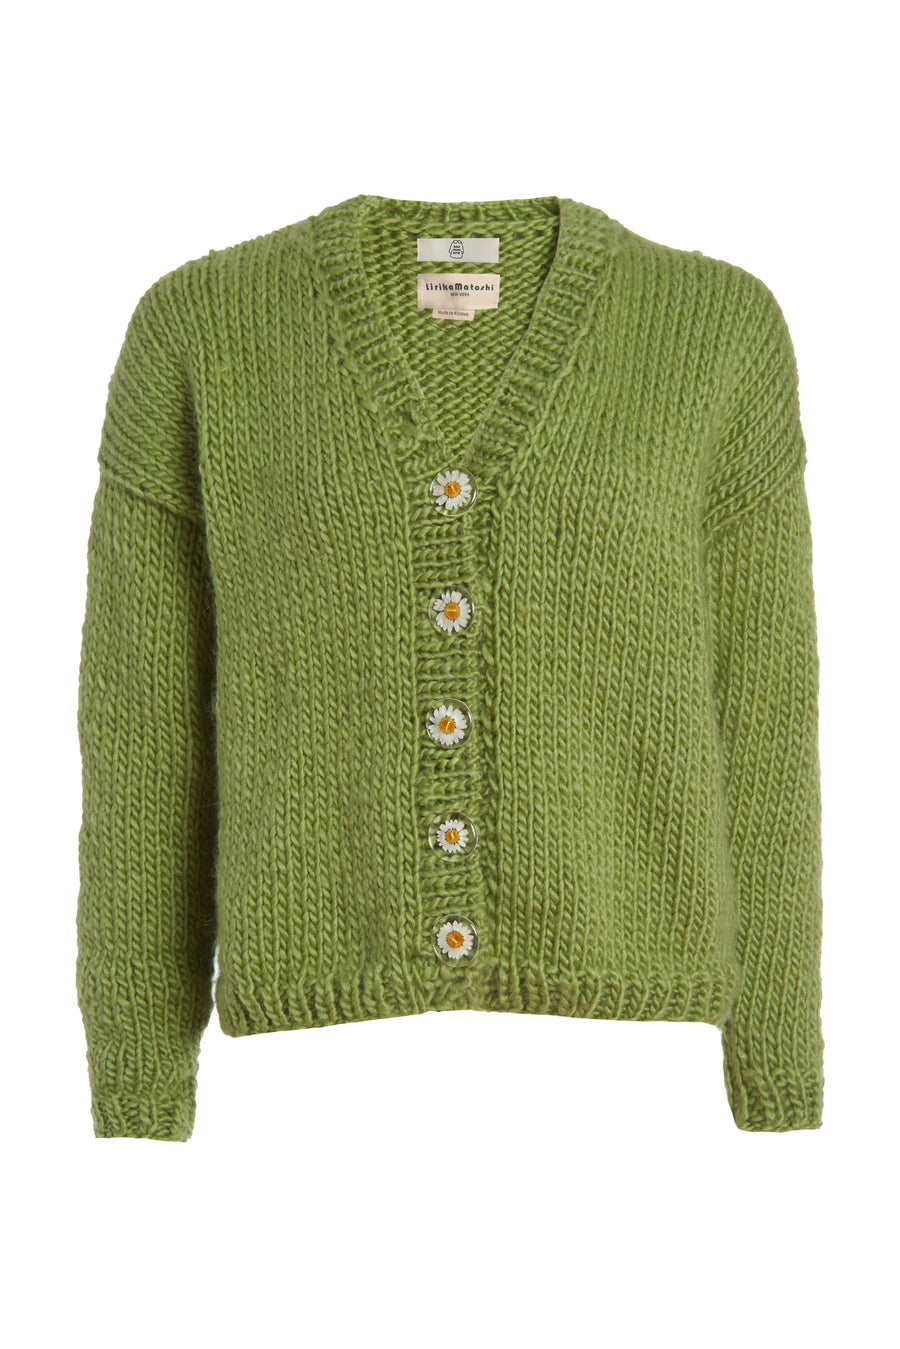 Daisy Mohair Sweater - LM x Dauphinette